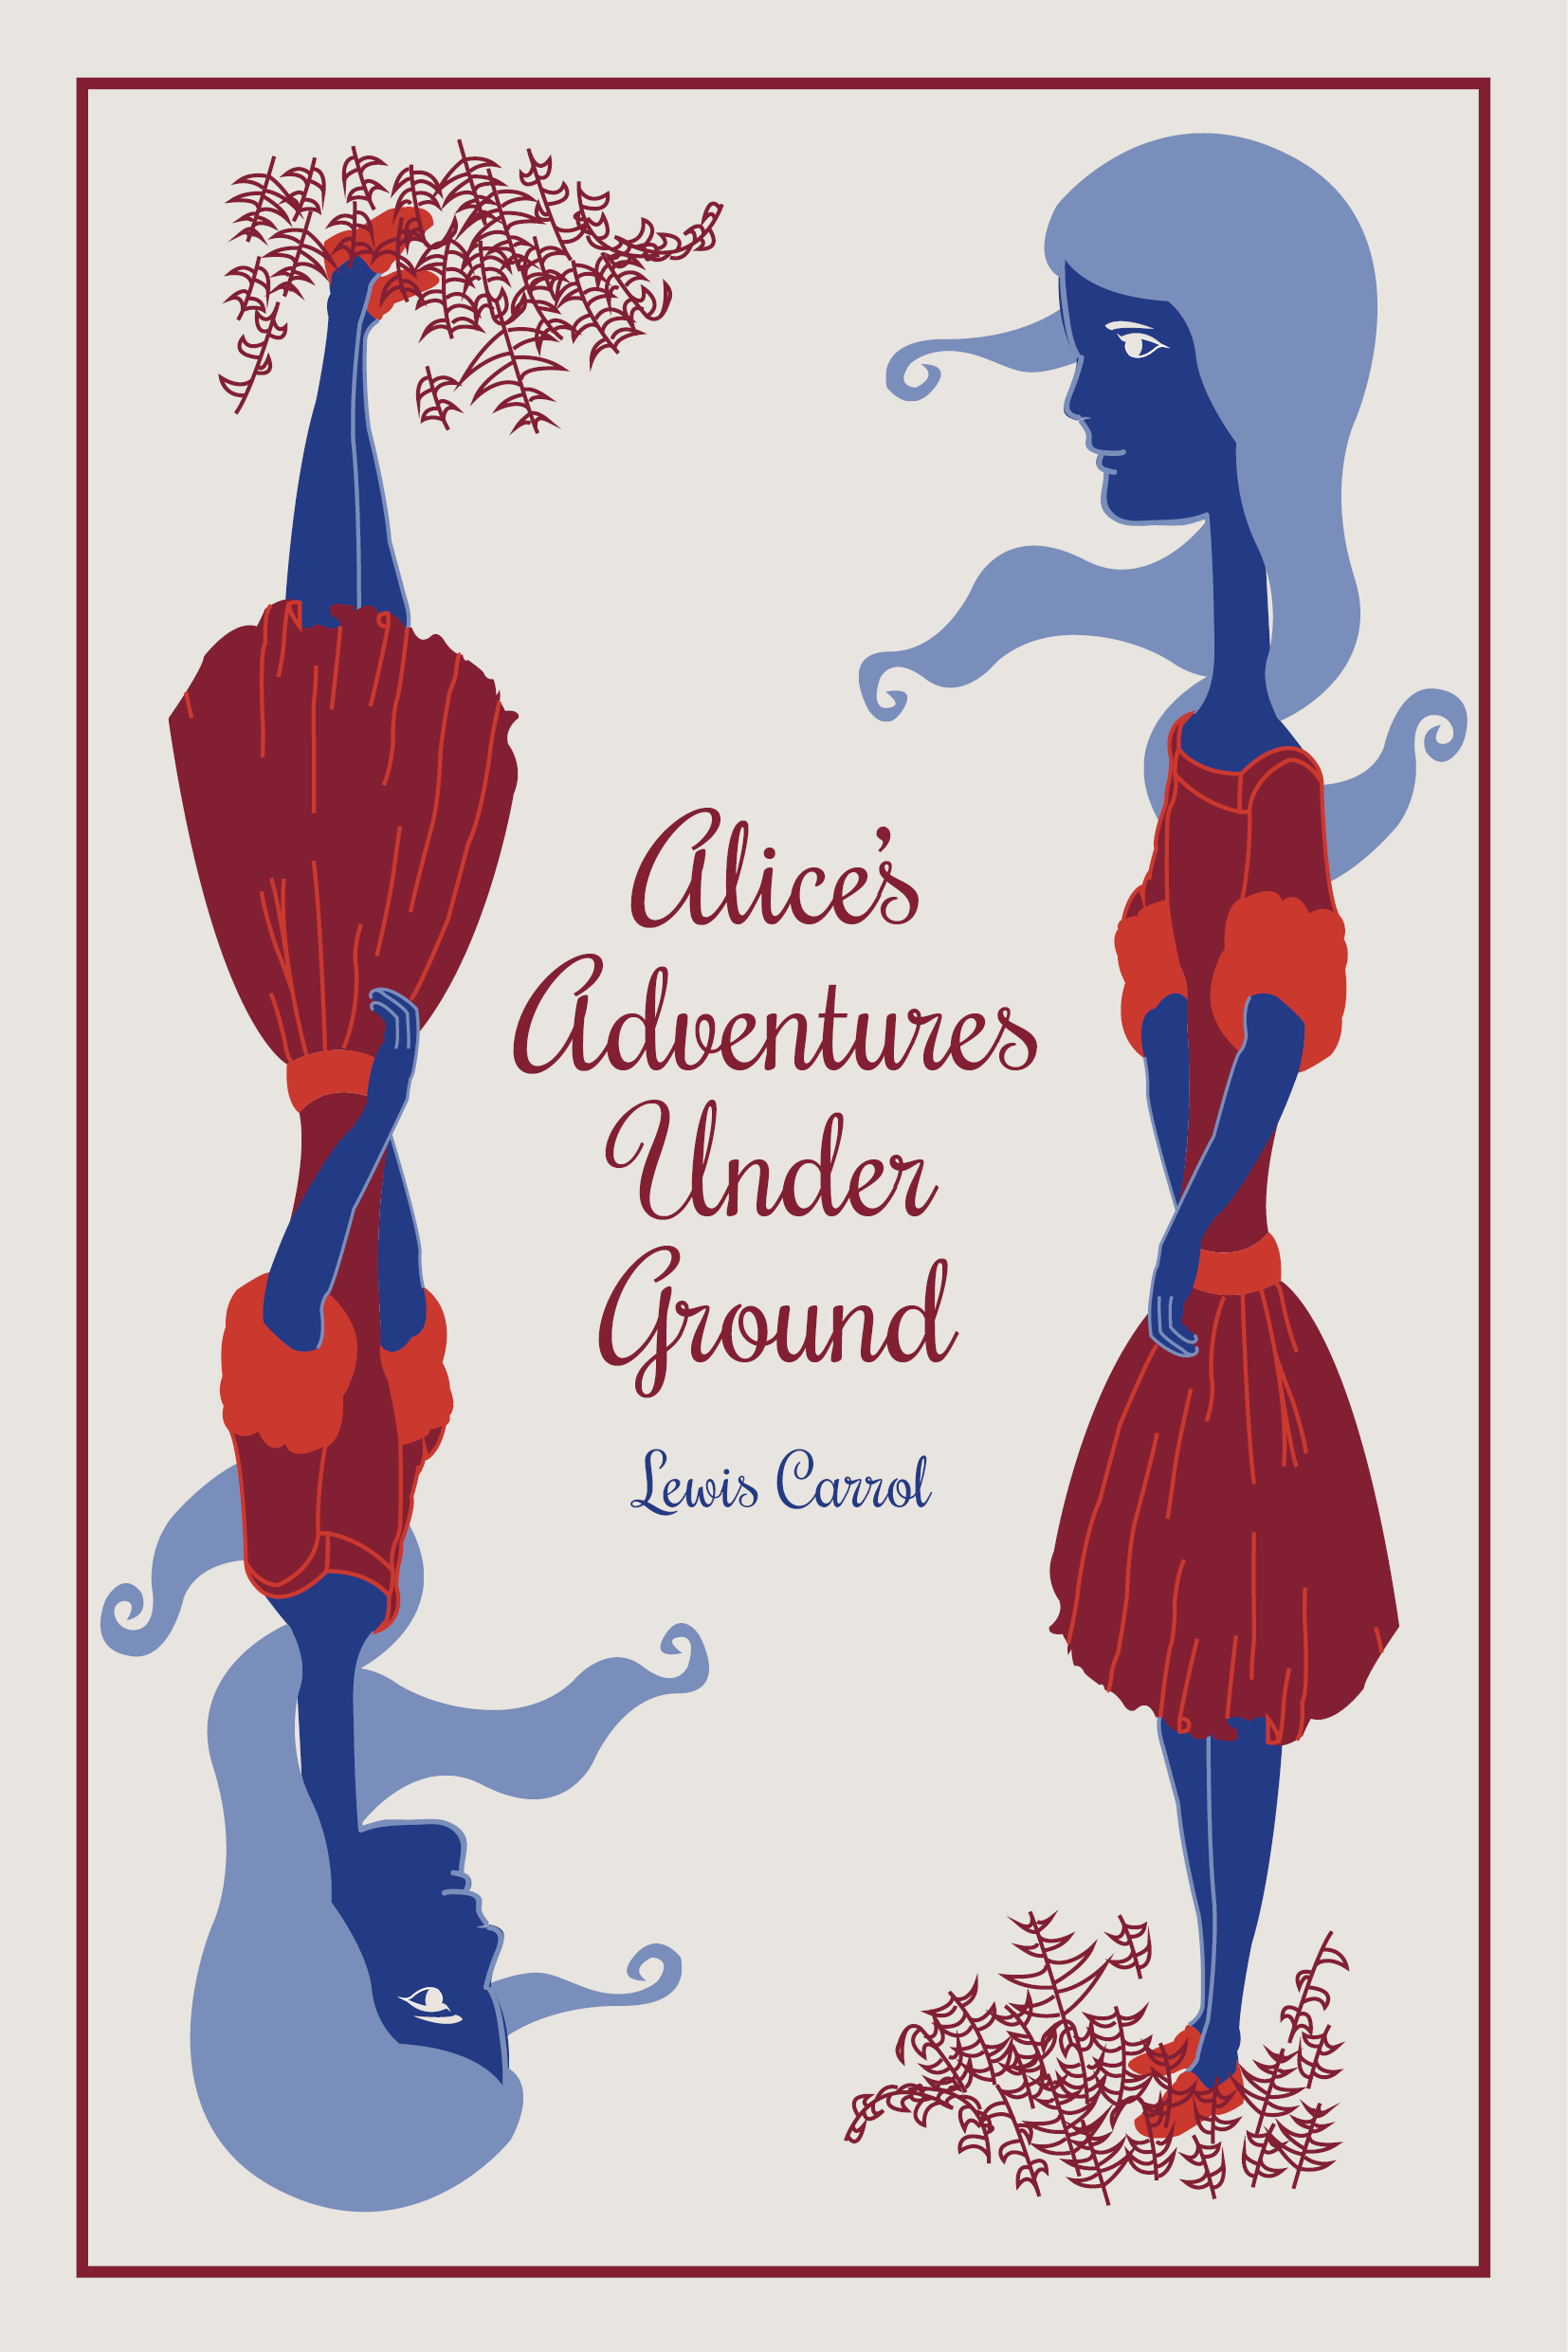 Alice's Adventures Underground New Version 140x210_Front cover-300ppi.png